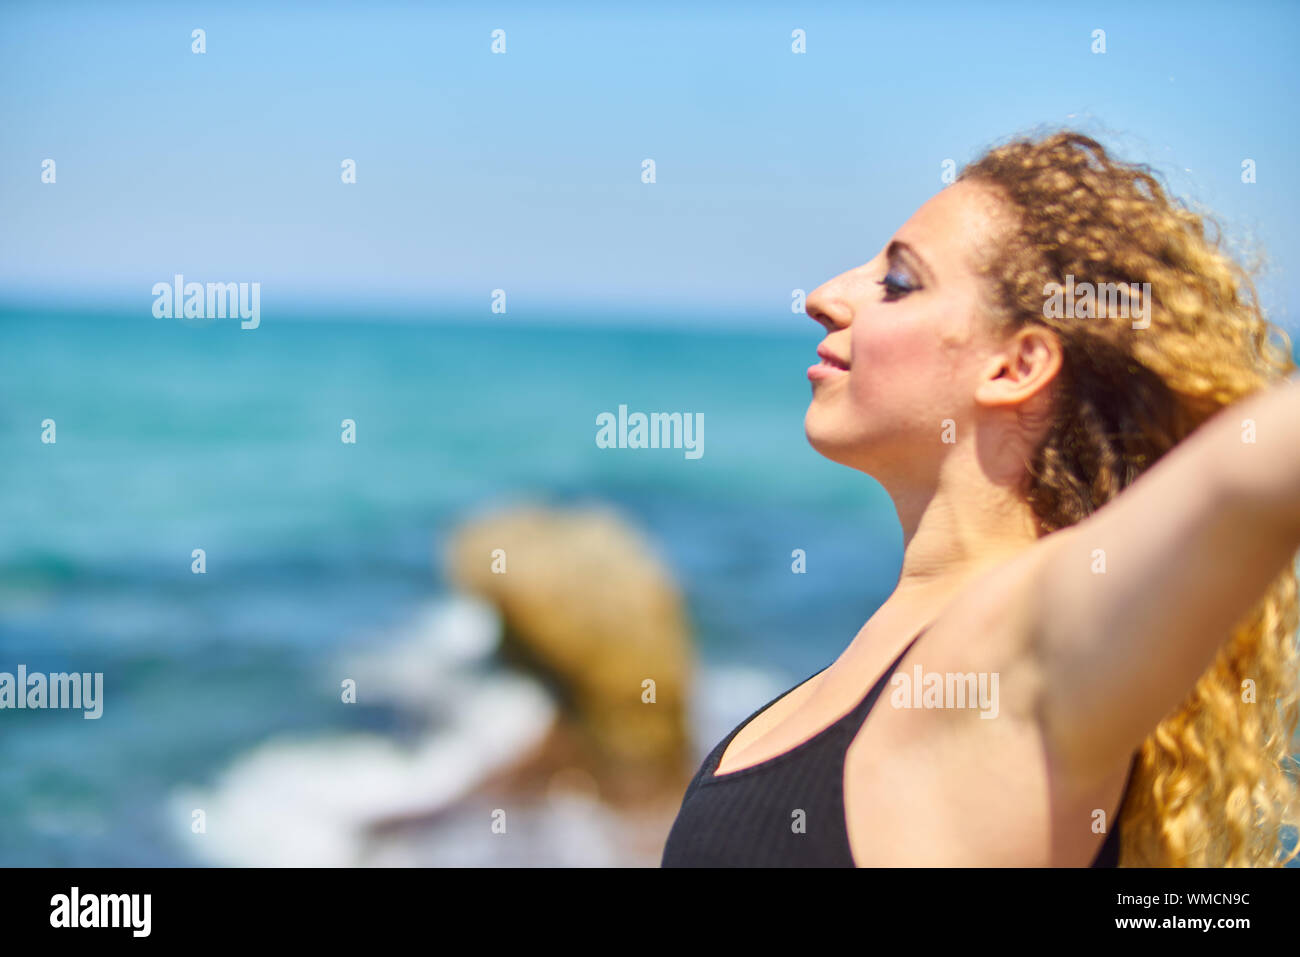 Young Woman With Blond Curly Hair At Beach Against Sky Stock Photo